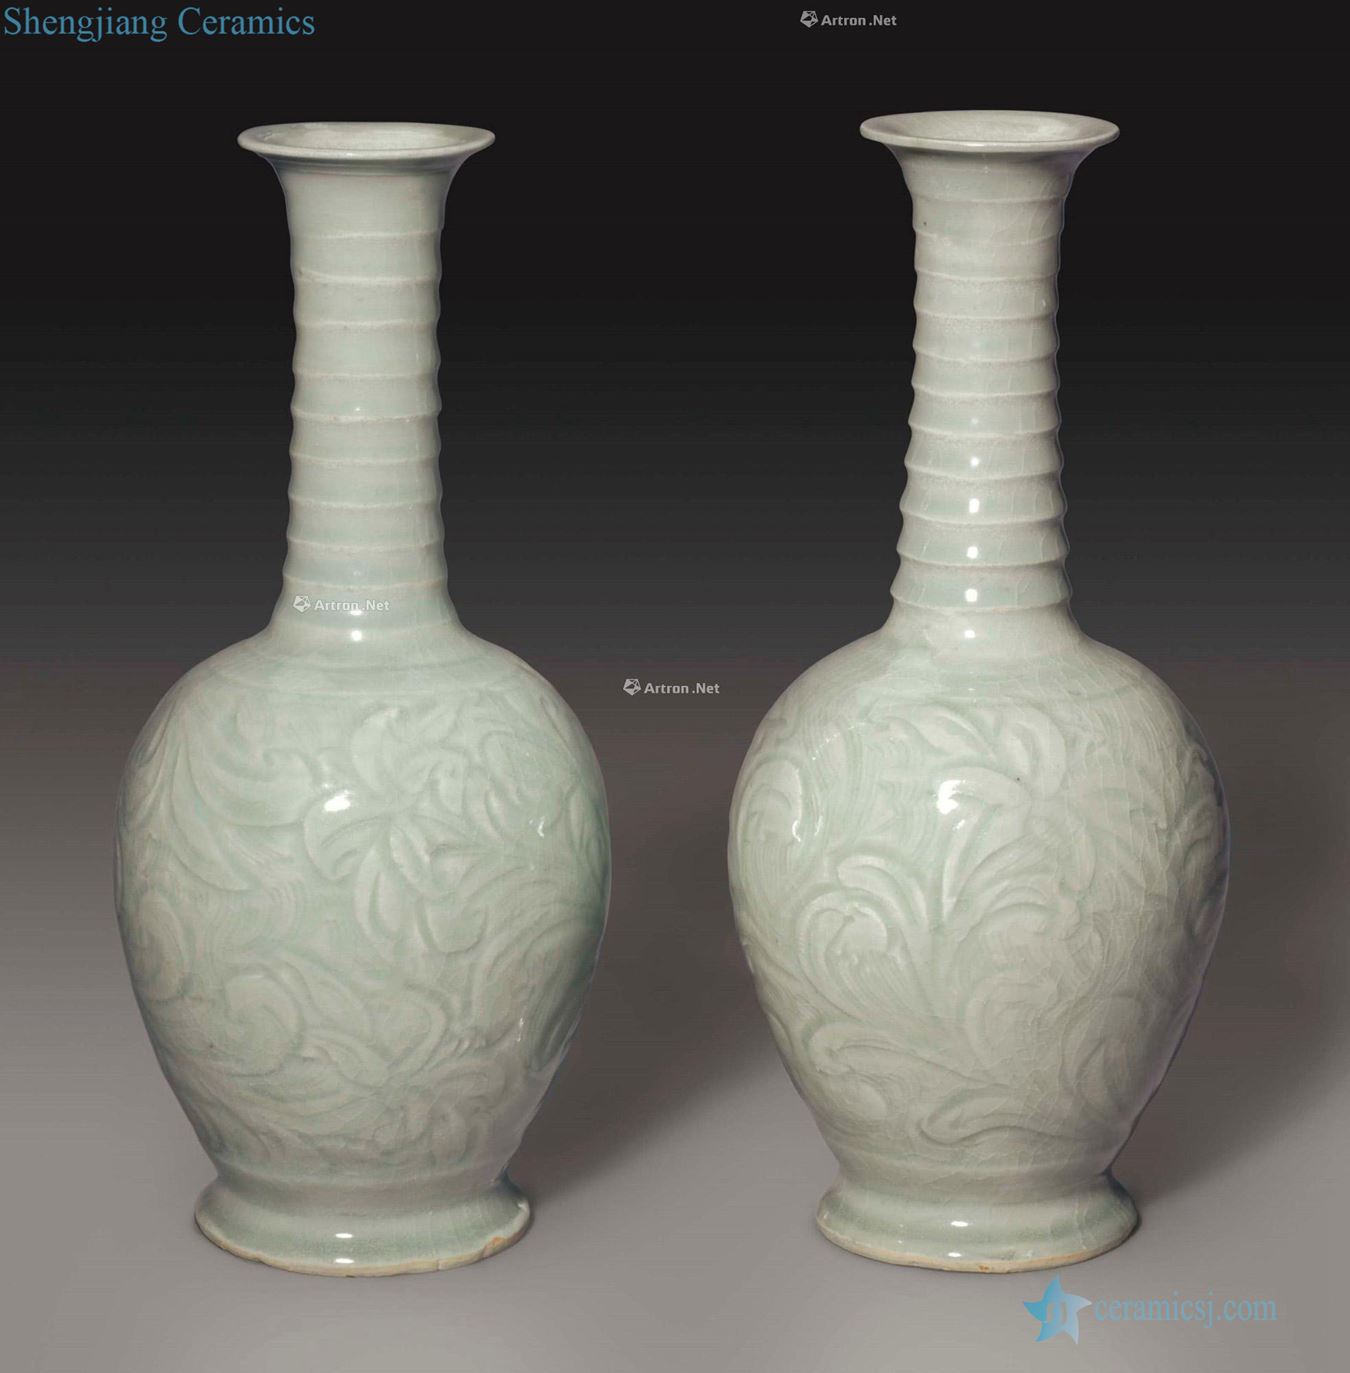 SONG DYNASTY (AD 960 ~ 960) is A RARE PAIR OF CARVED QINGBAI 'DAY LILY and VASES